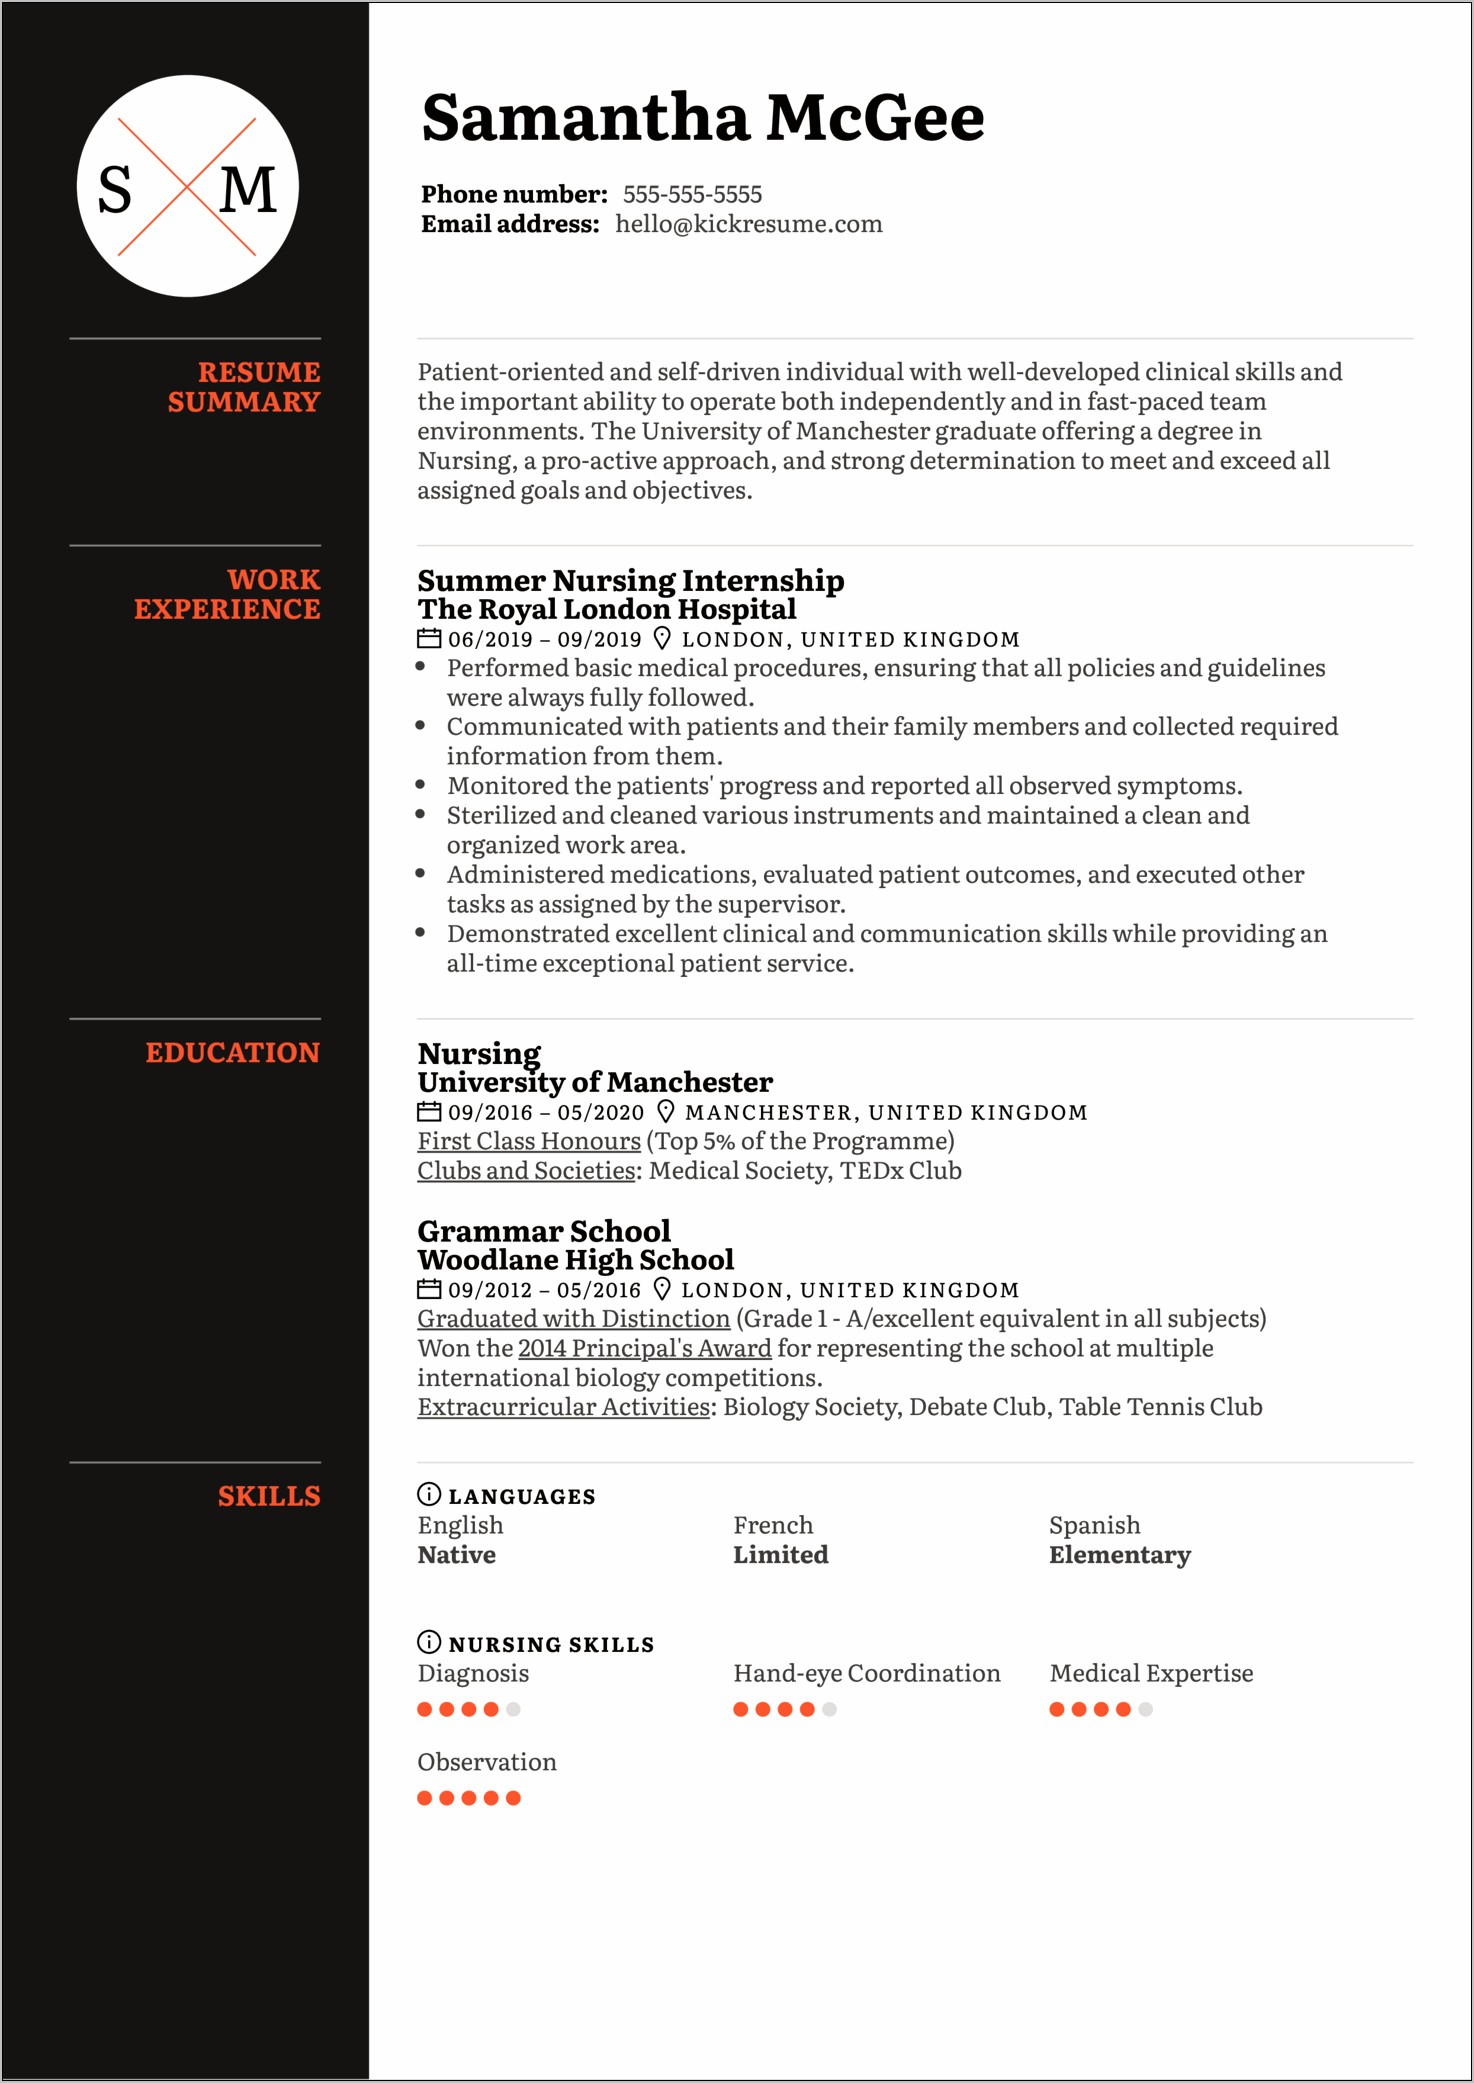 Recent Graduate With Little Experience Resume